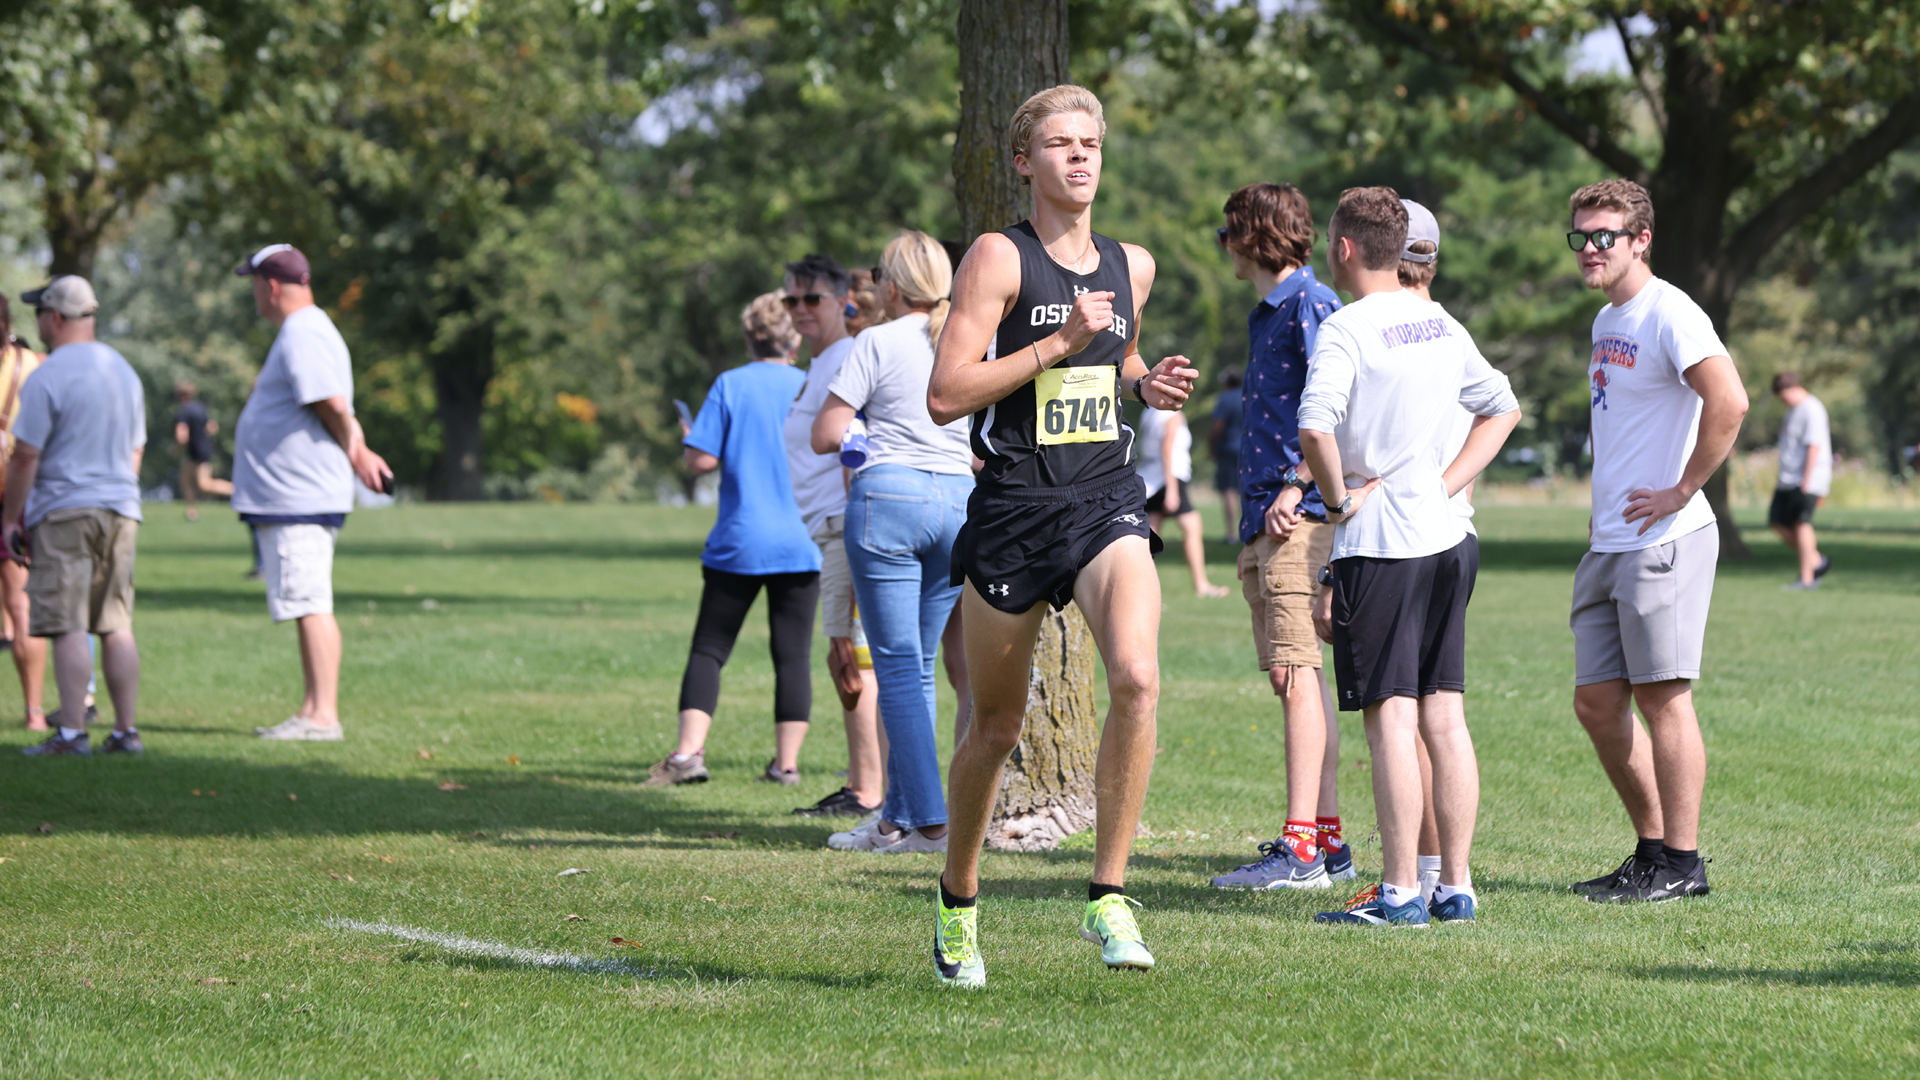 Cameron Cullen took 19th at the NCAA Division III North Regional